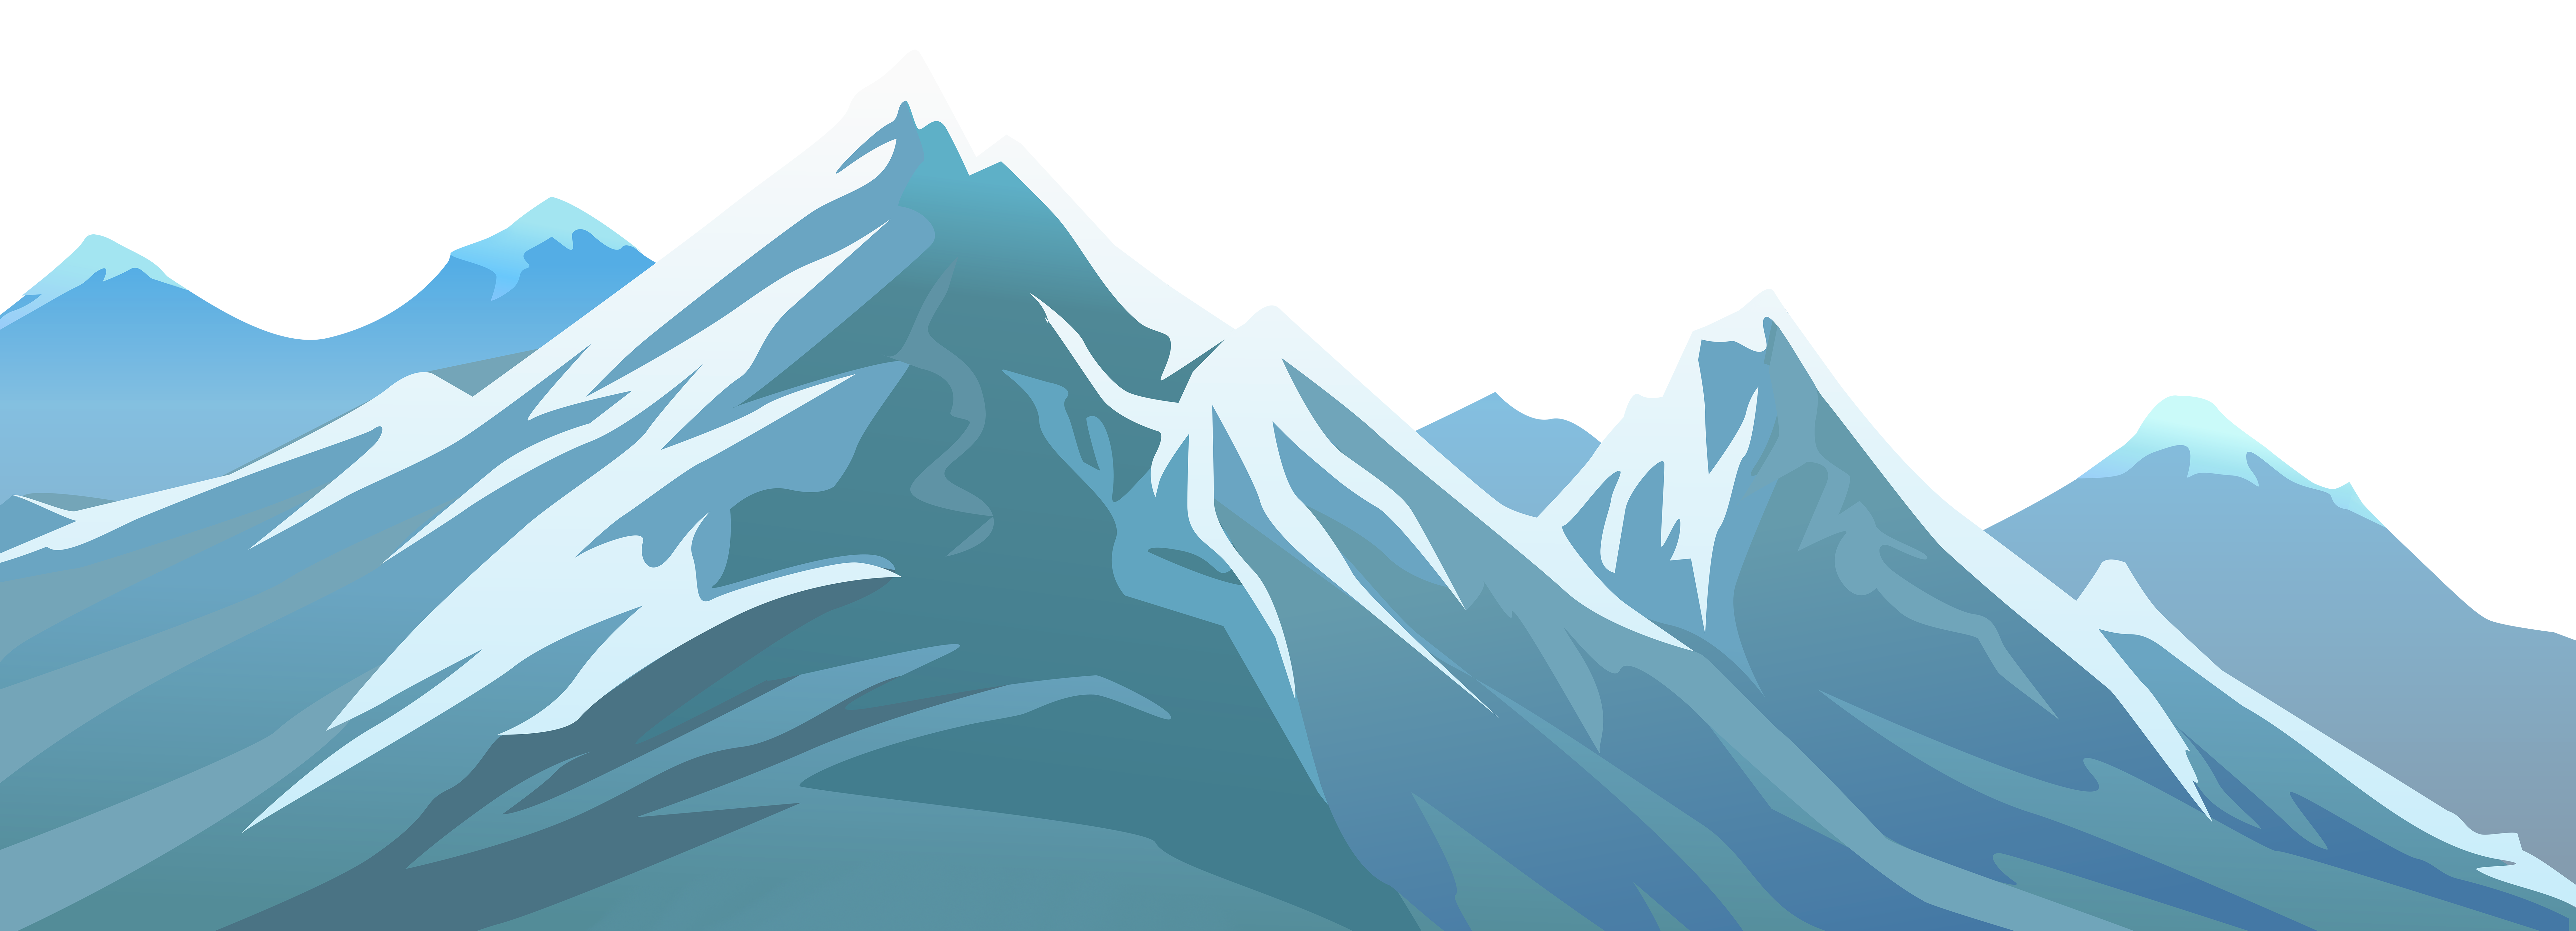 Mountains clipart - Clipground